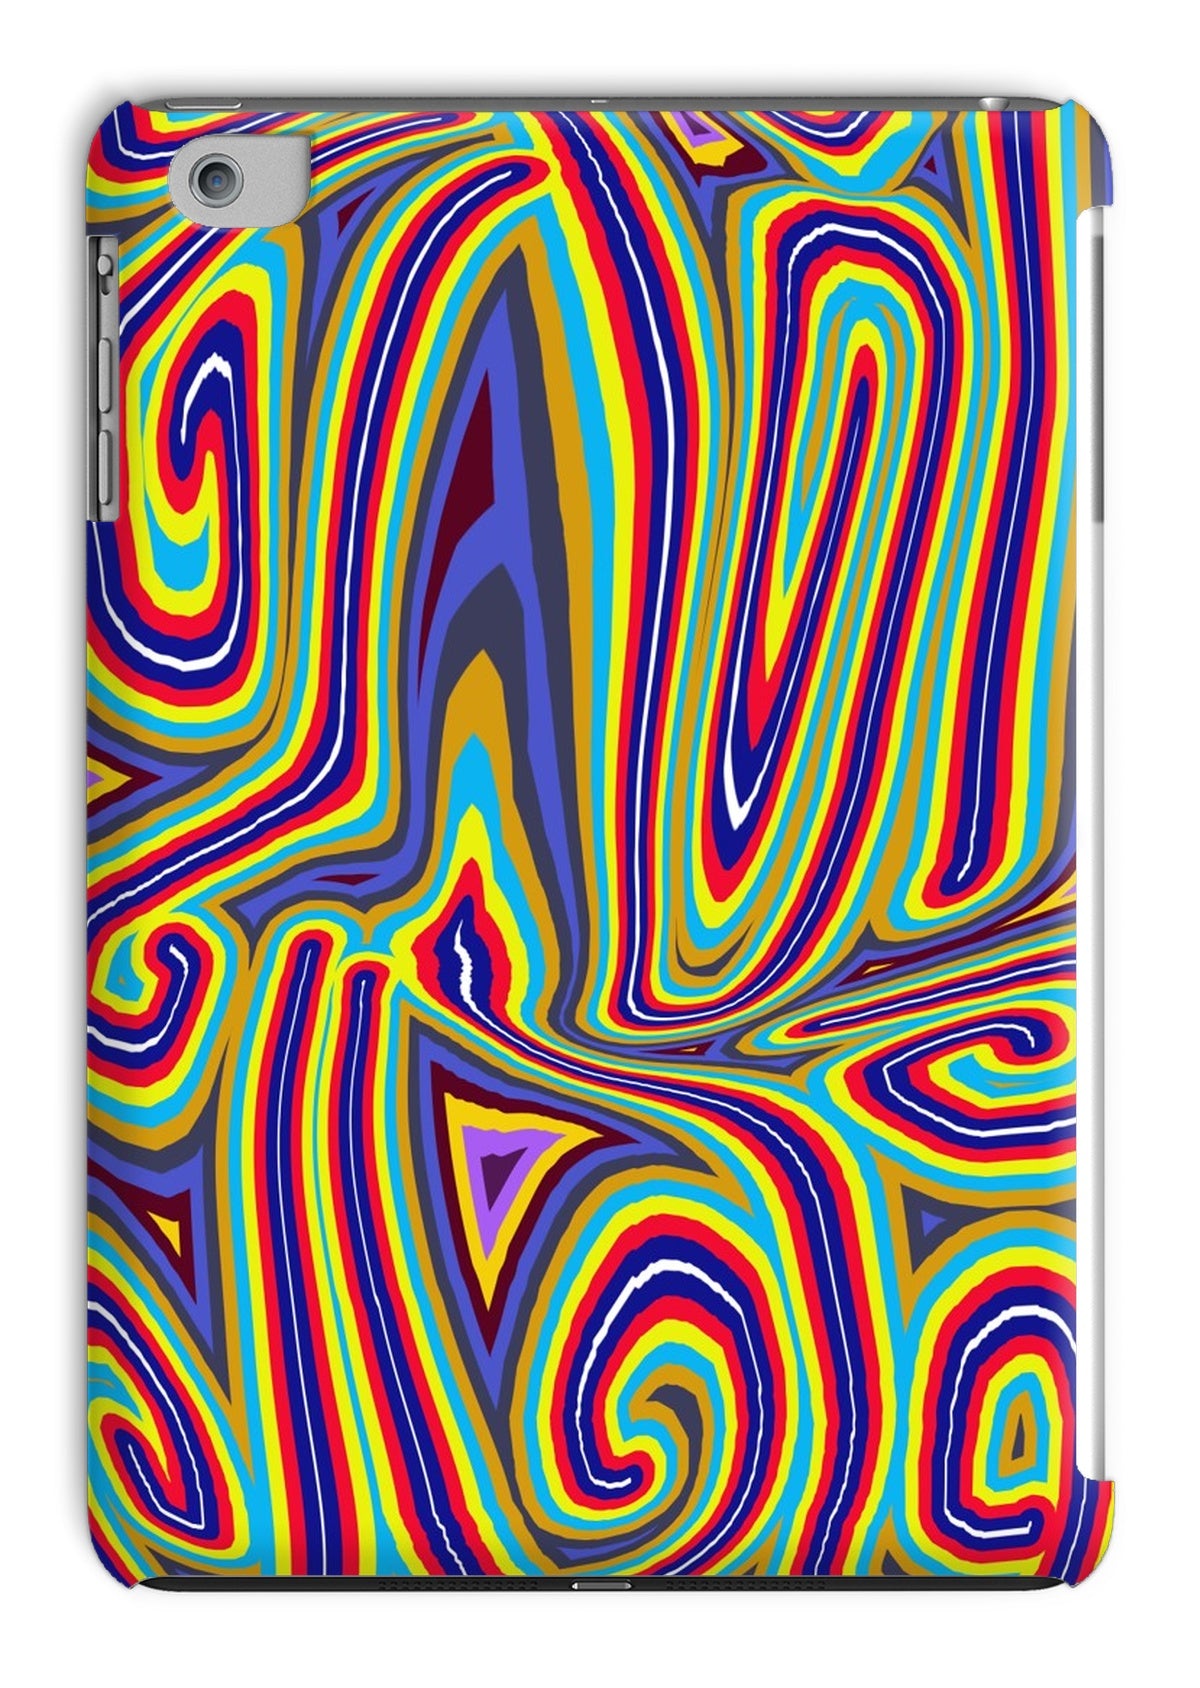 Curly Swirls Tablet Cases